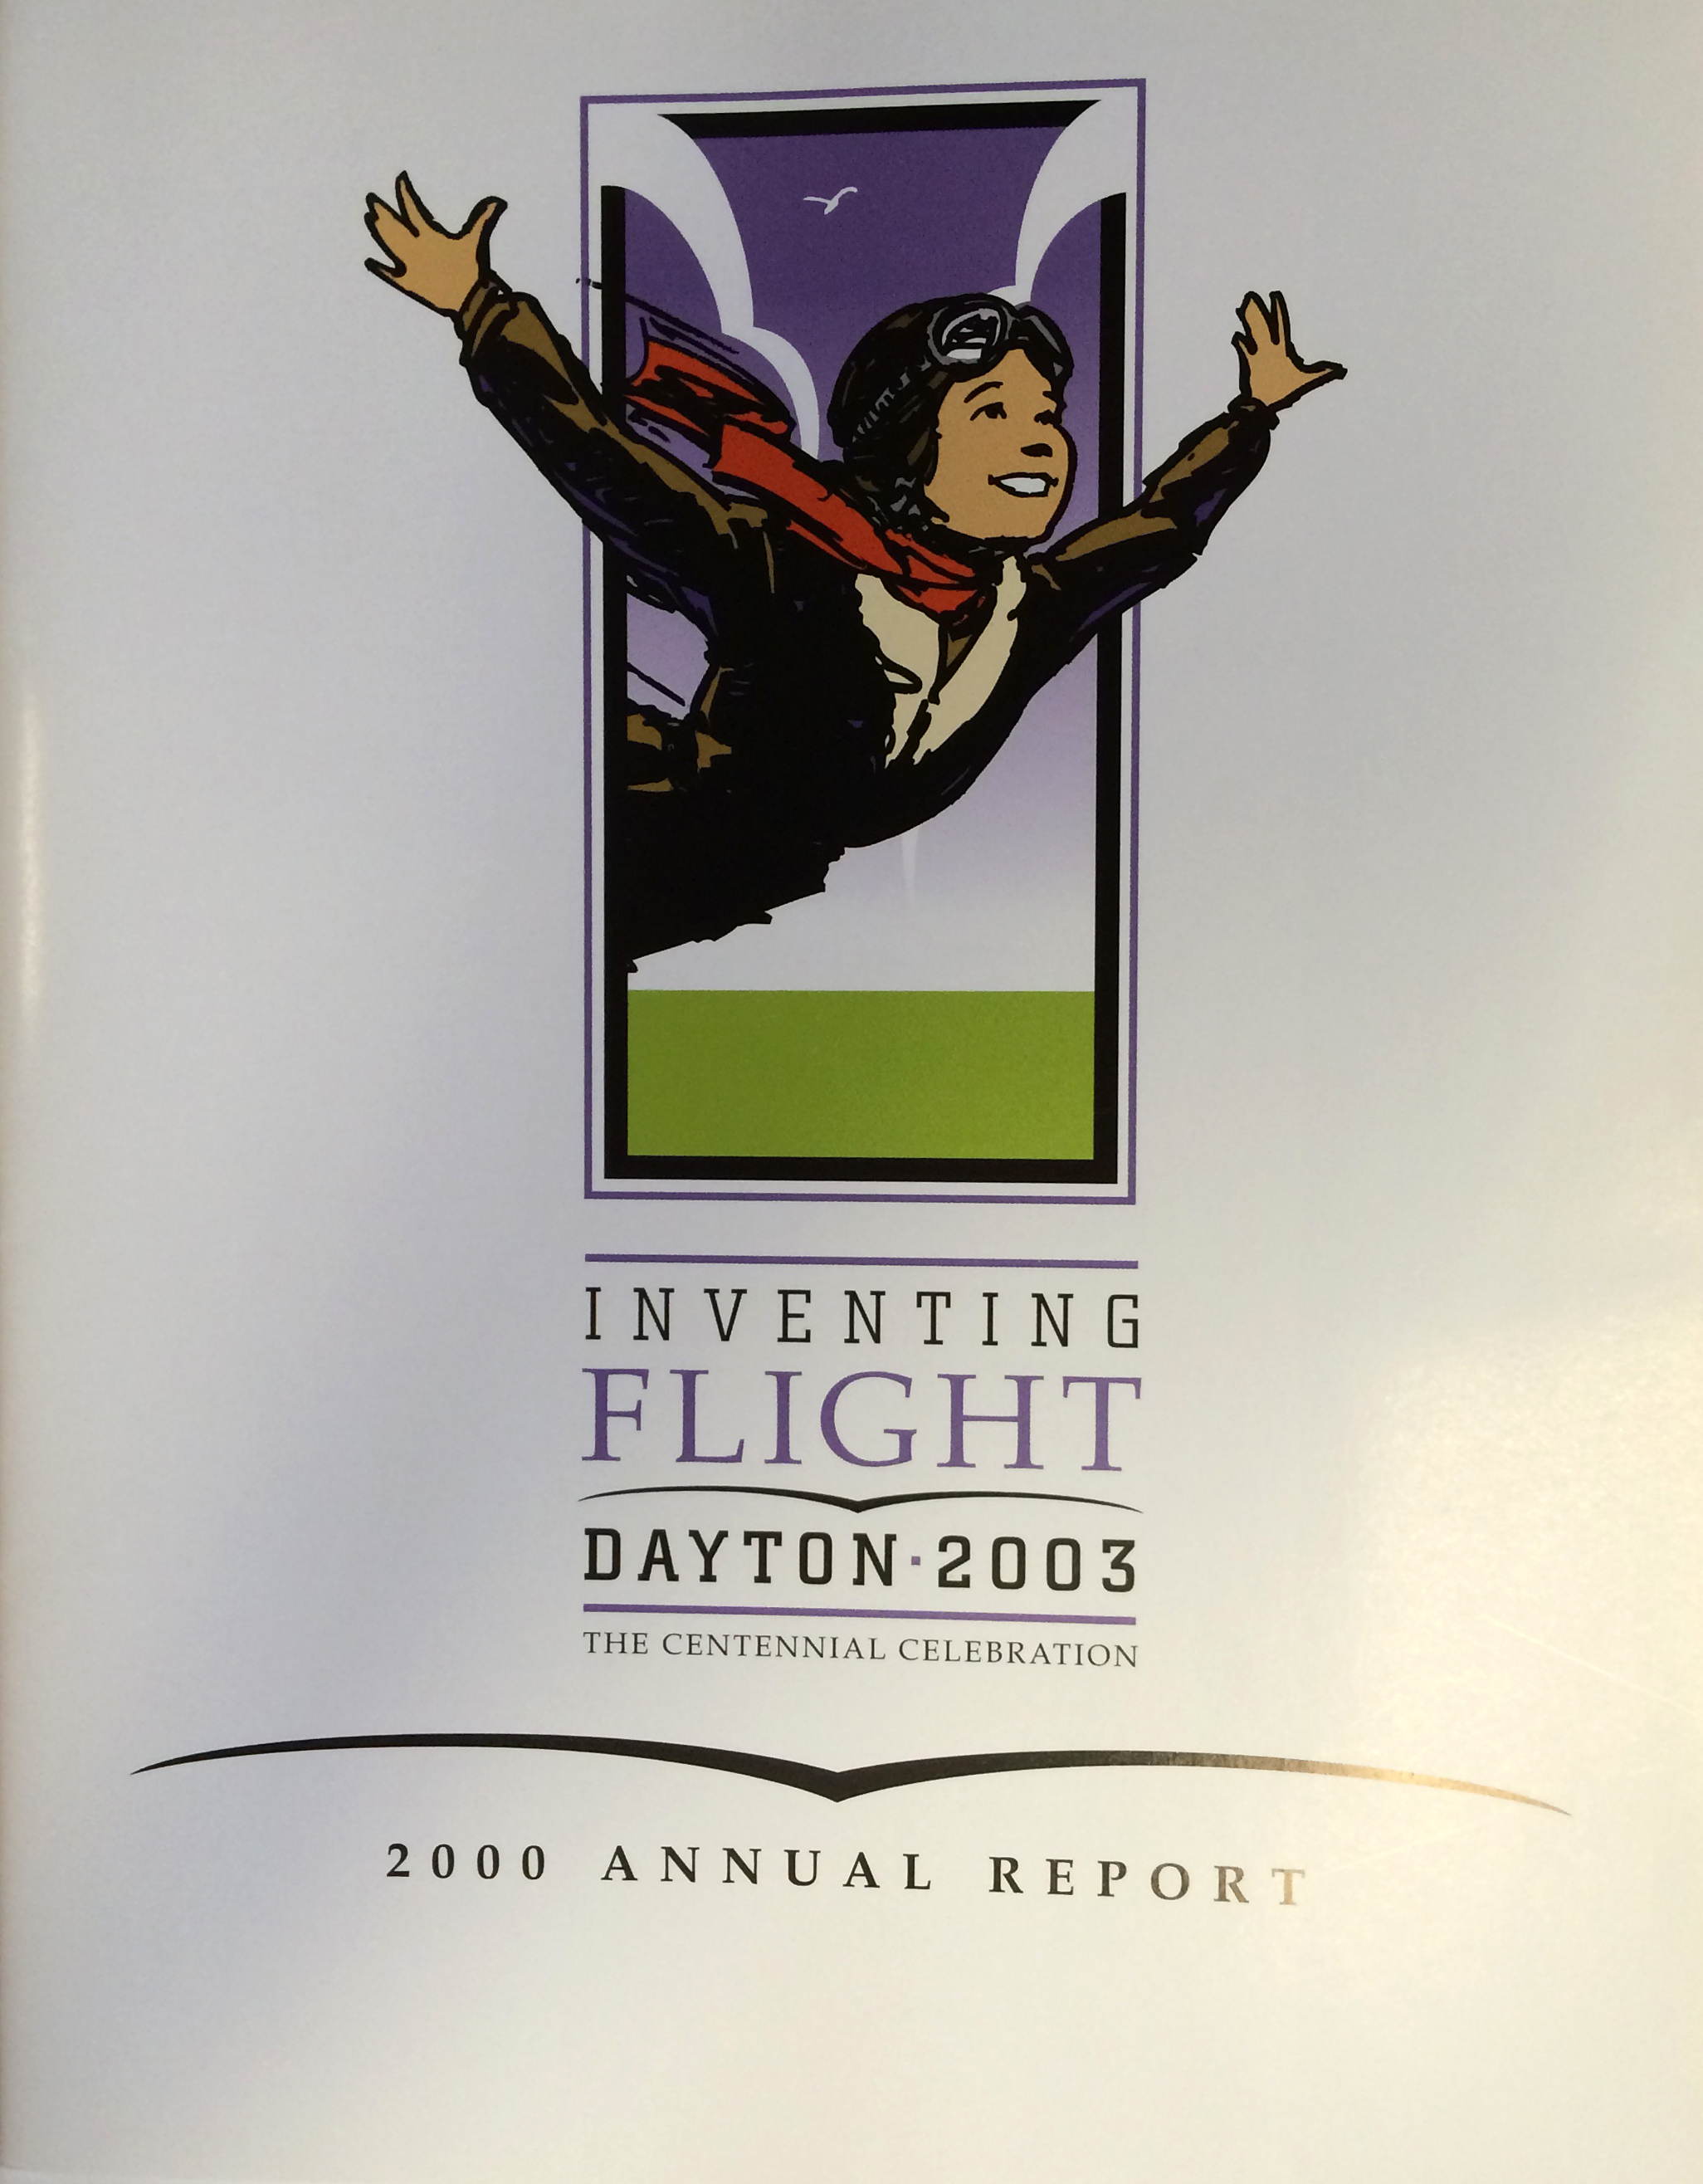 Inventing Flight Annual Report, 2000 (MS-483, Tillson Collection, Box 1, File 4)